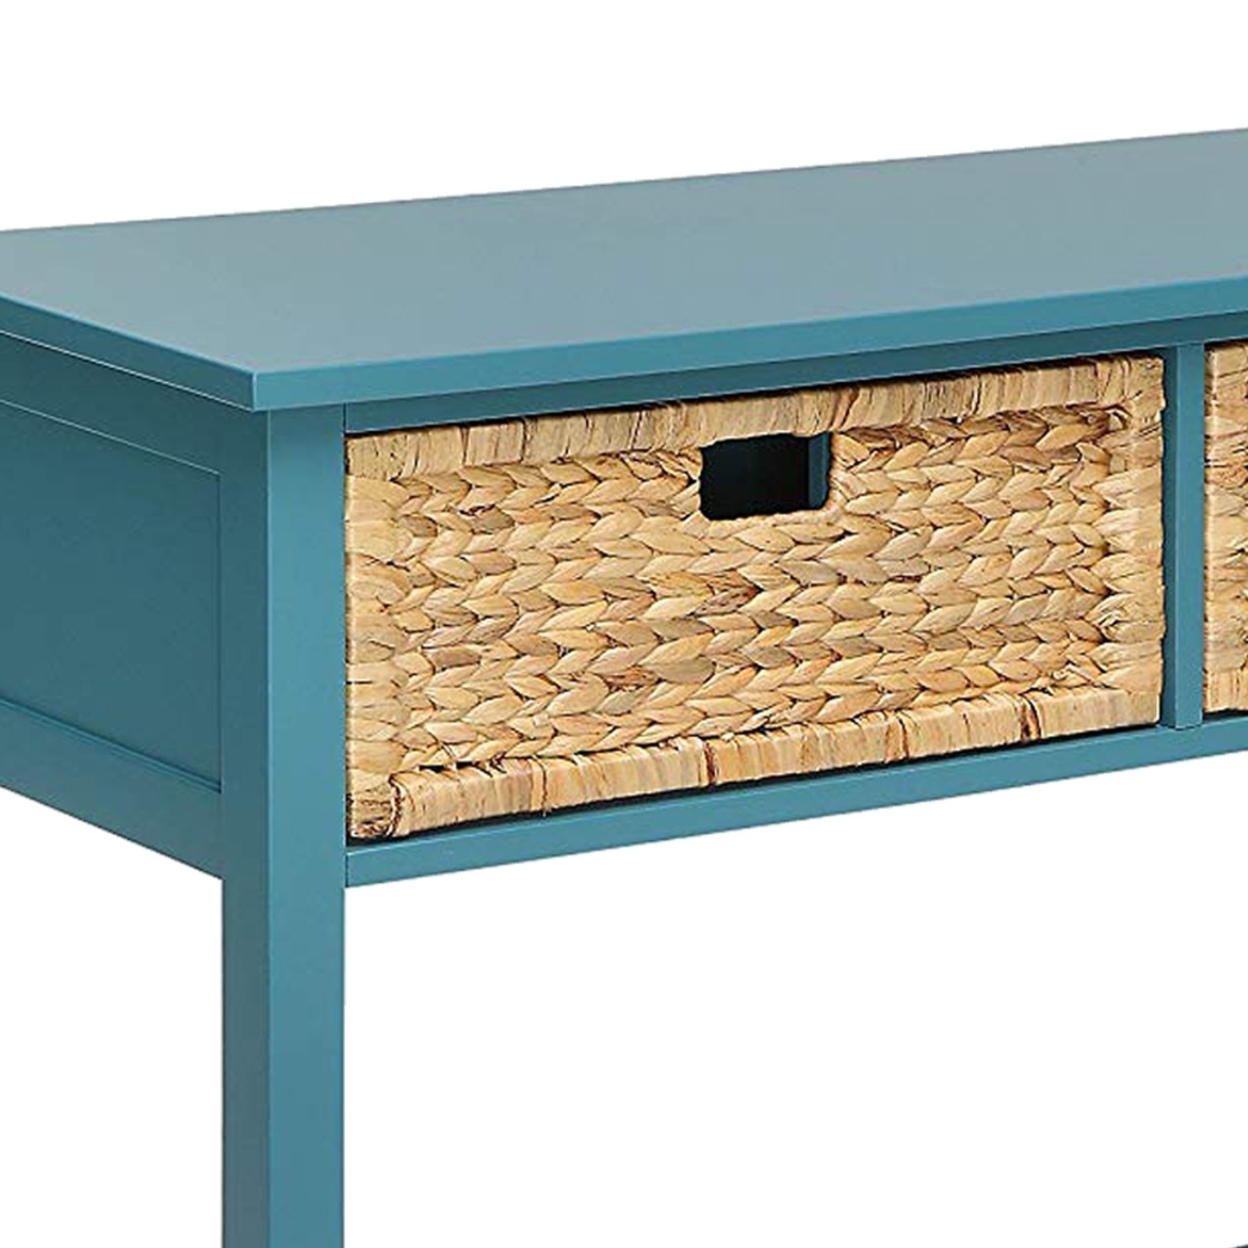 Flavius Console Table With 2 Drawers, Blue- Saltoro Sherpi